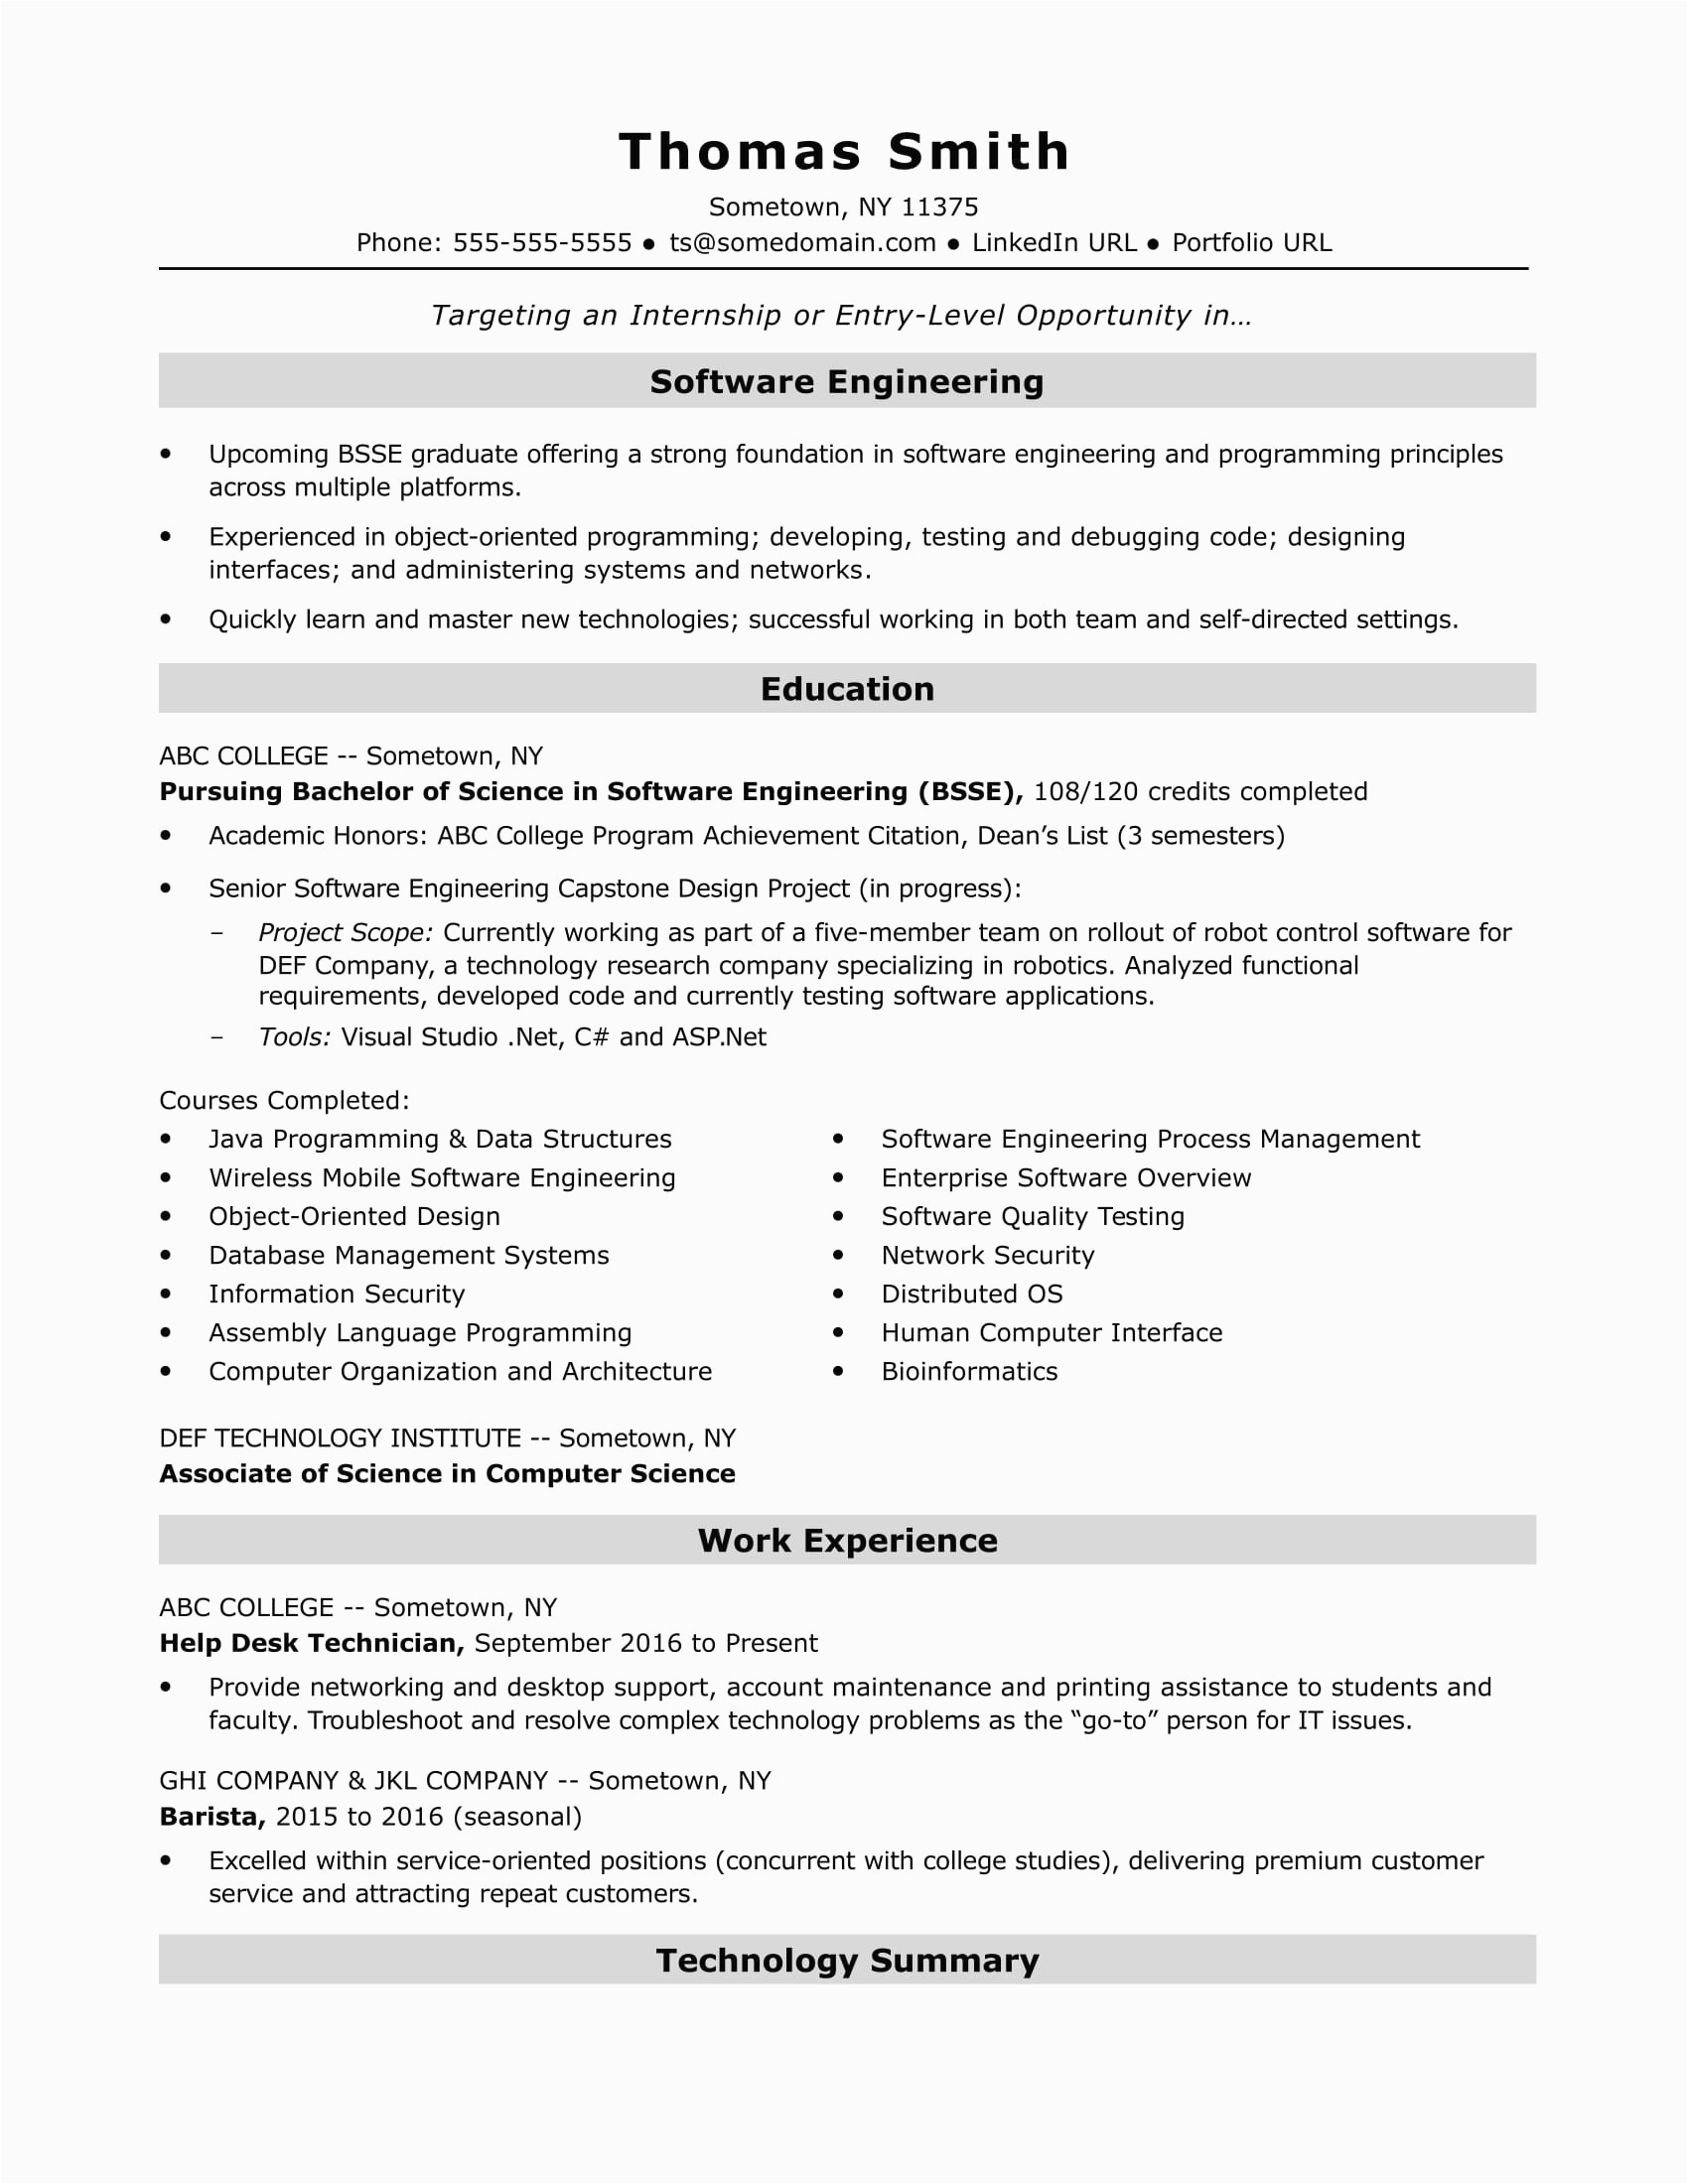 Experience Resume Samples for software Engineer software Engineer Resume No Experience